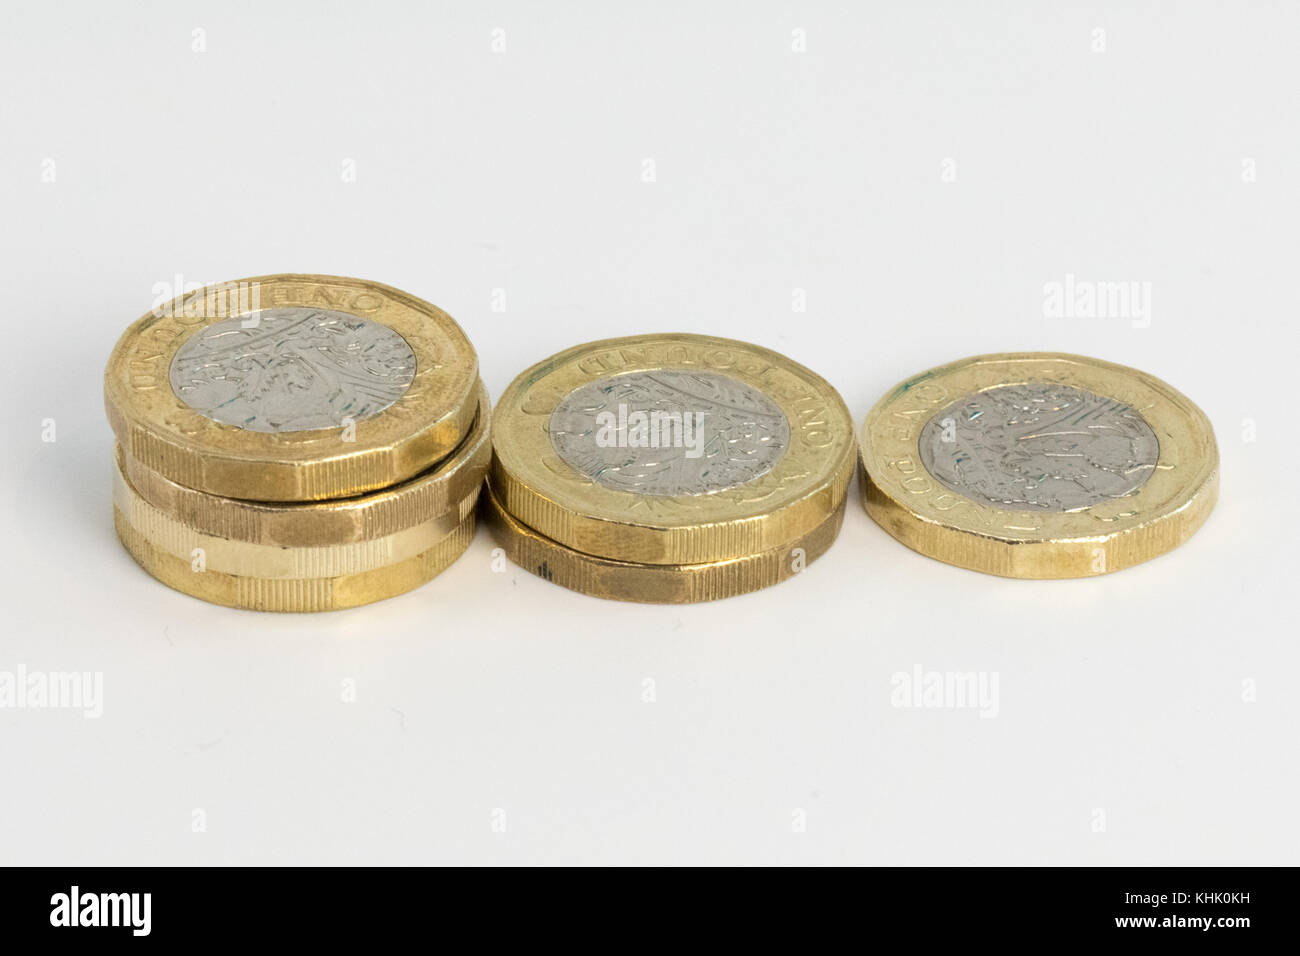 New Uk Pound coins in a stack Stock Photo